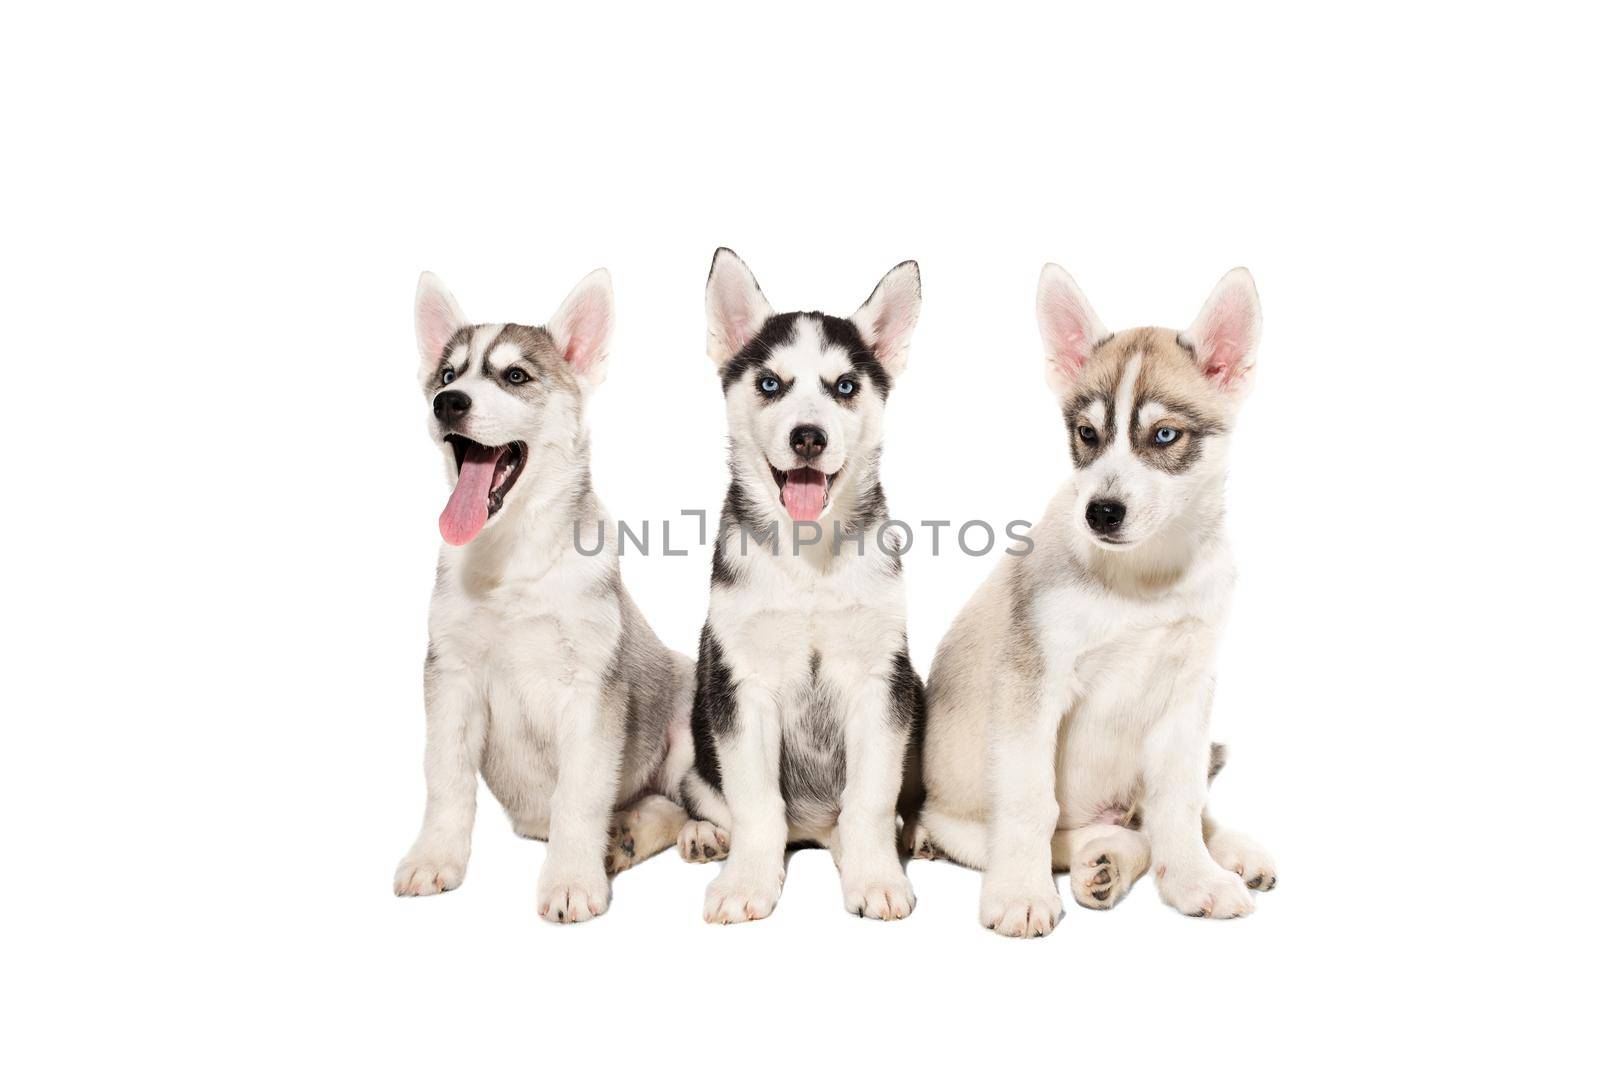 Group of happy siberian husky puppies on white background. Dog. Copy space